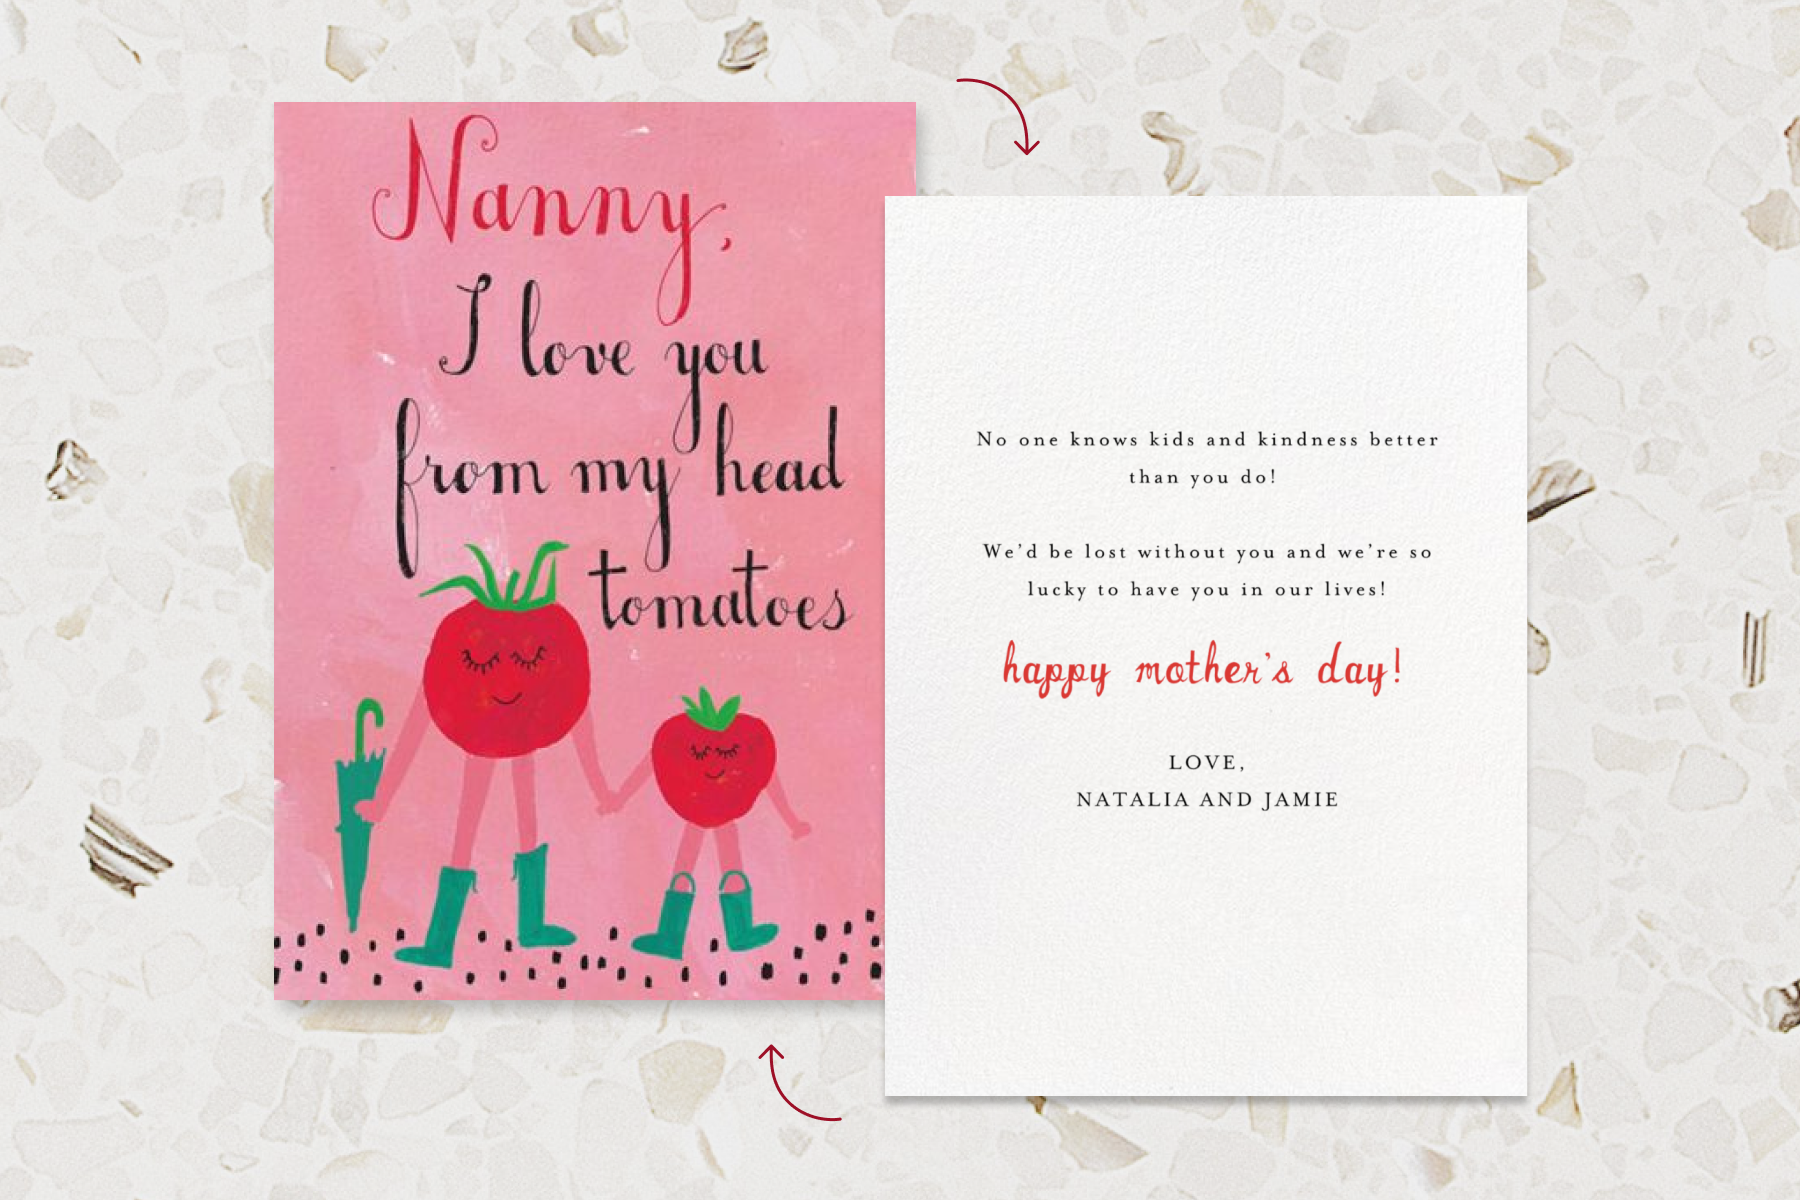 An illustrated anthropomorphic tomatoes Mother’s Day card showing one of the messages suggested below. The card reads “Nanny, I love you from my head tomatoes.”